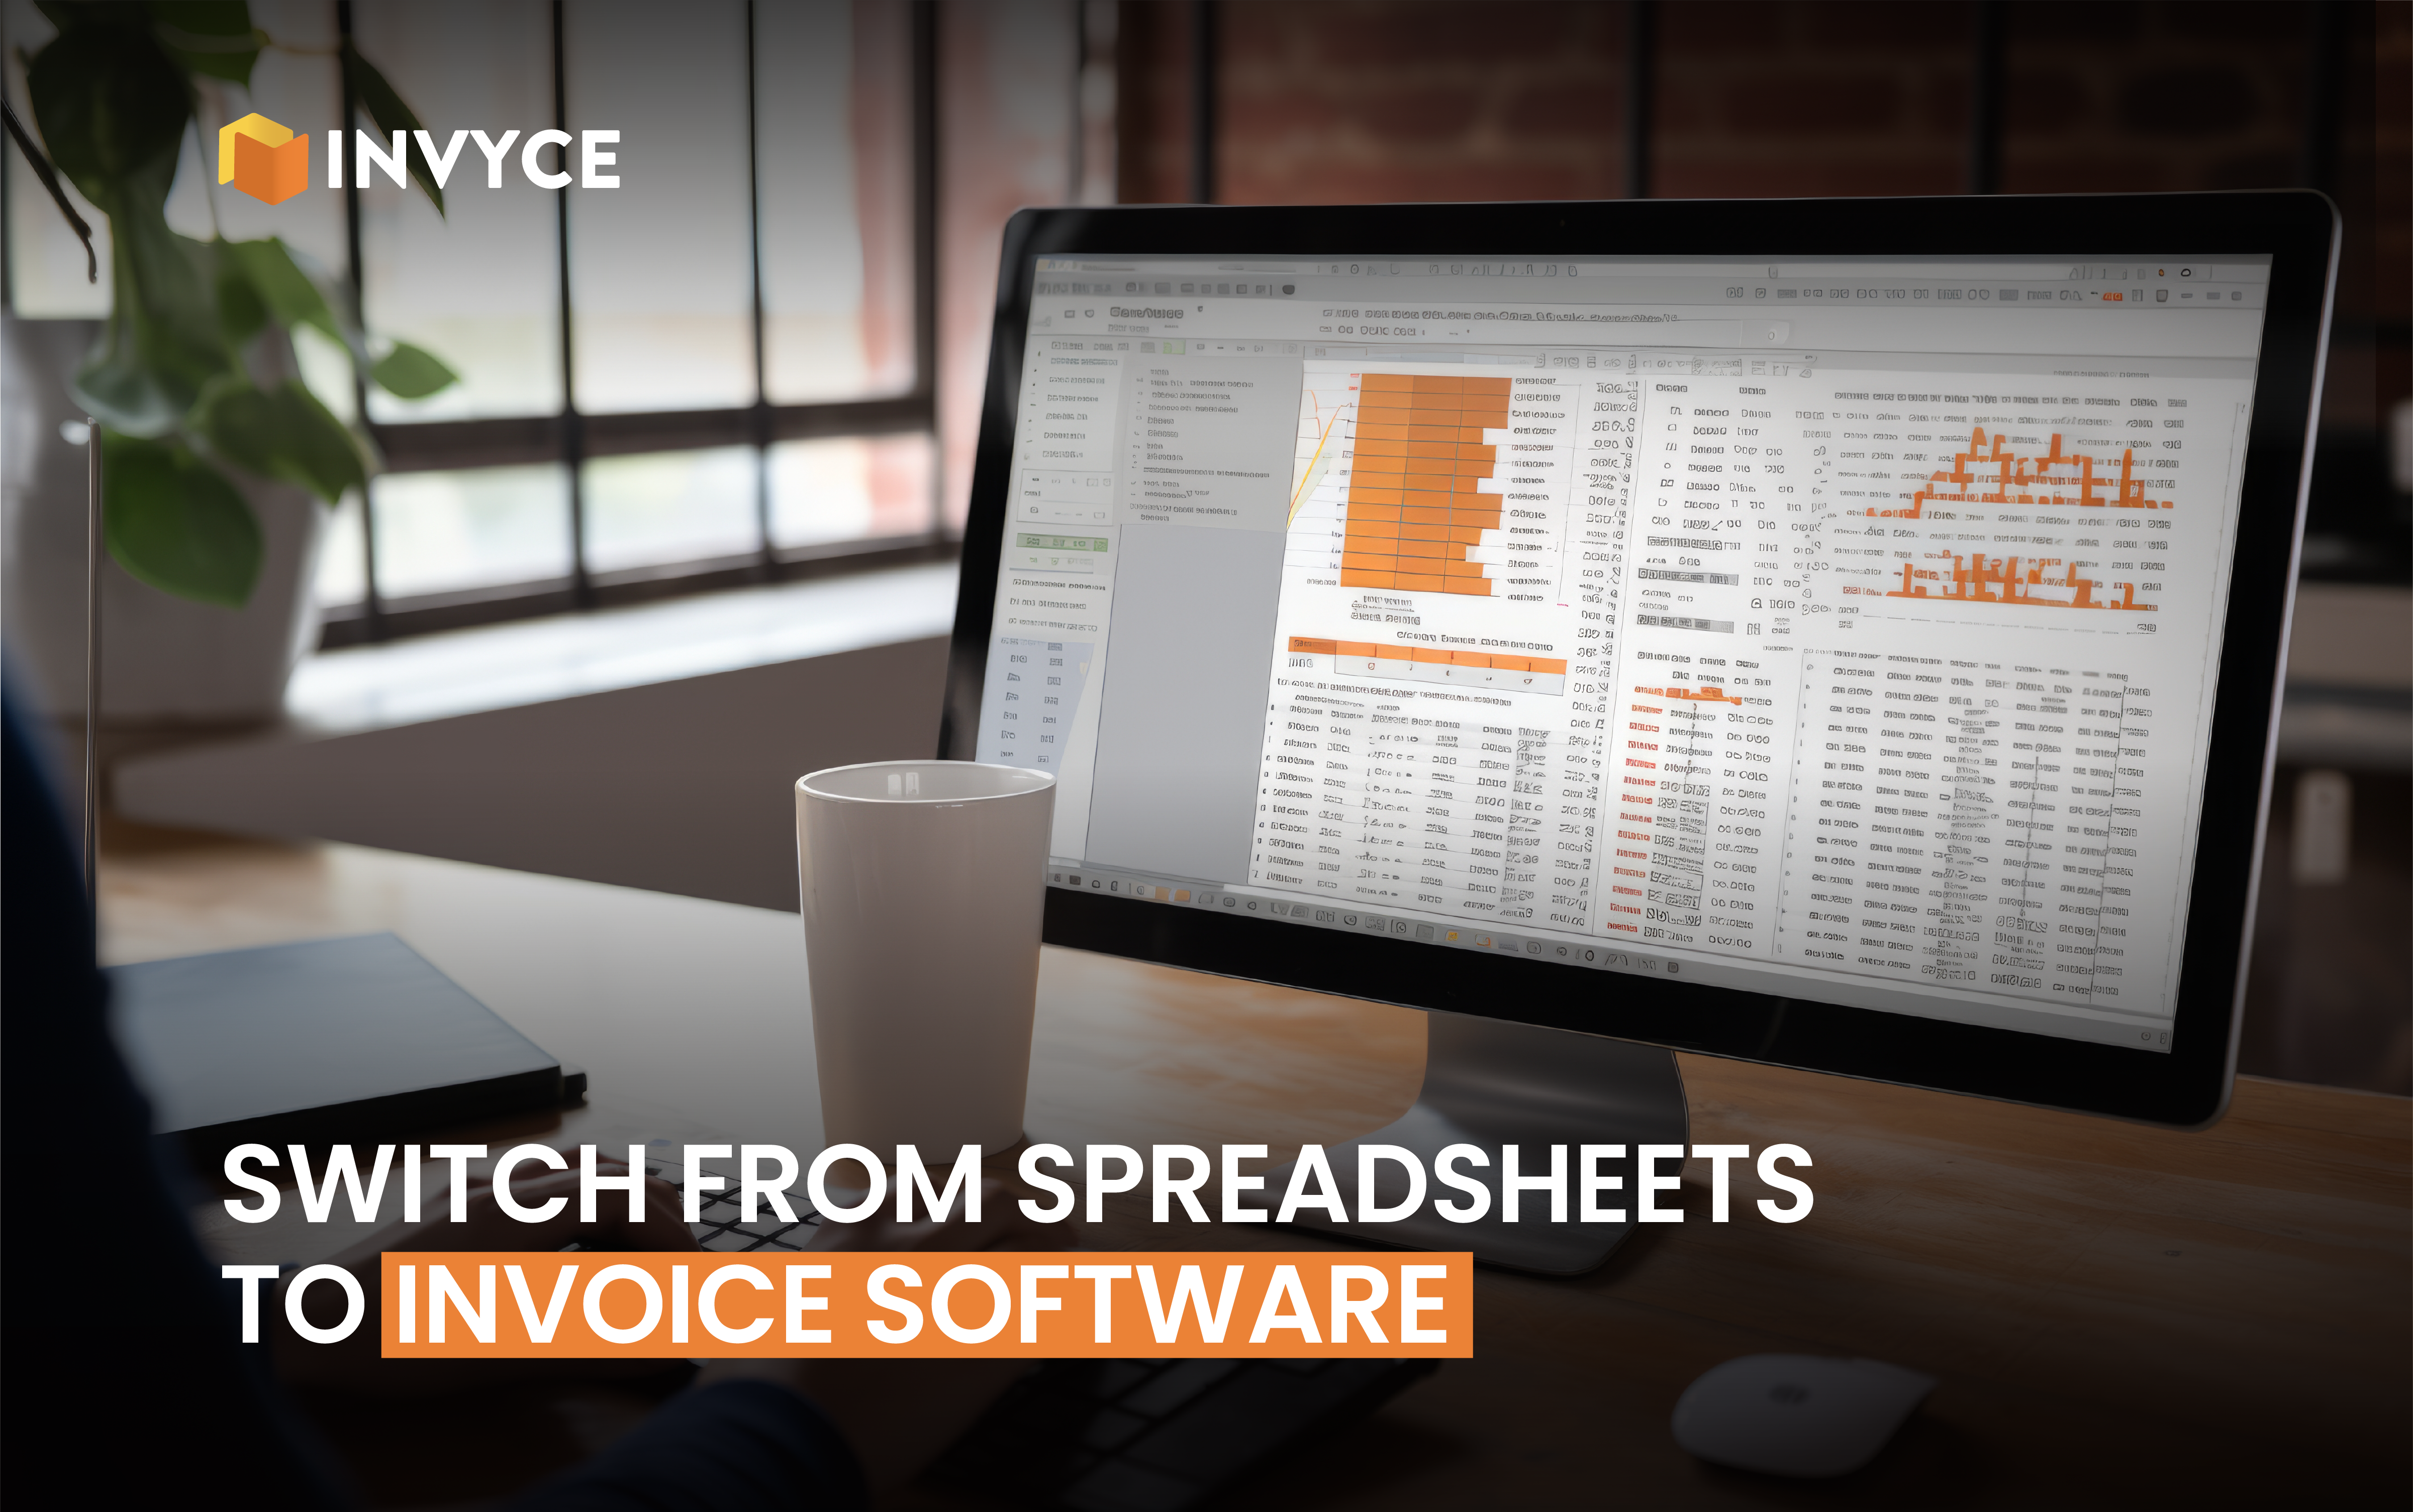 #Switch from Spreadsheets to Invoice Software